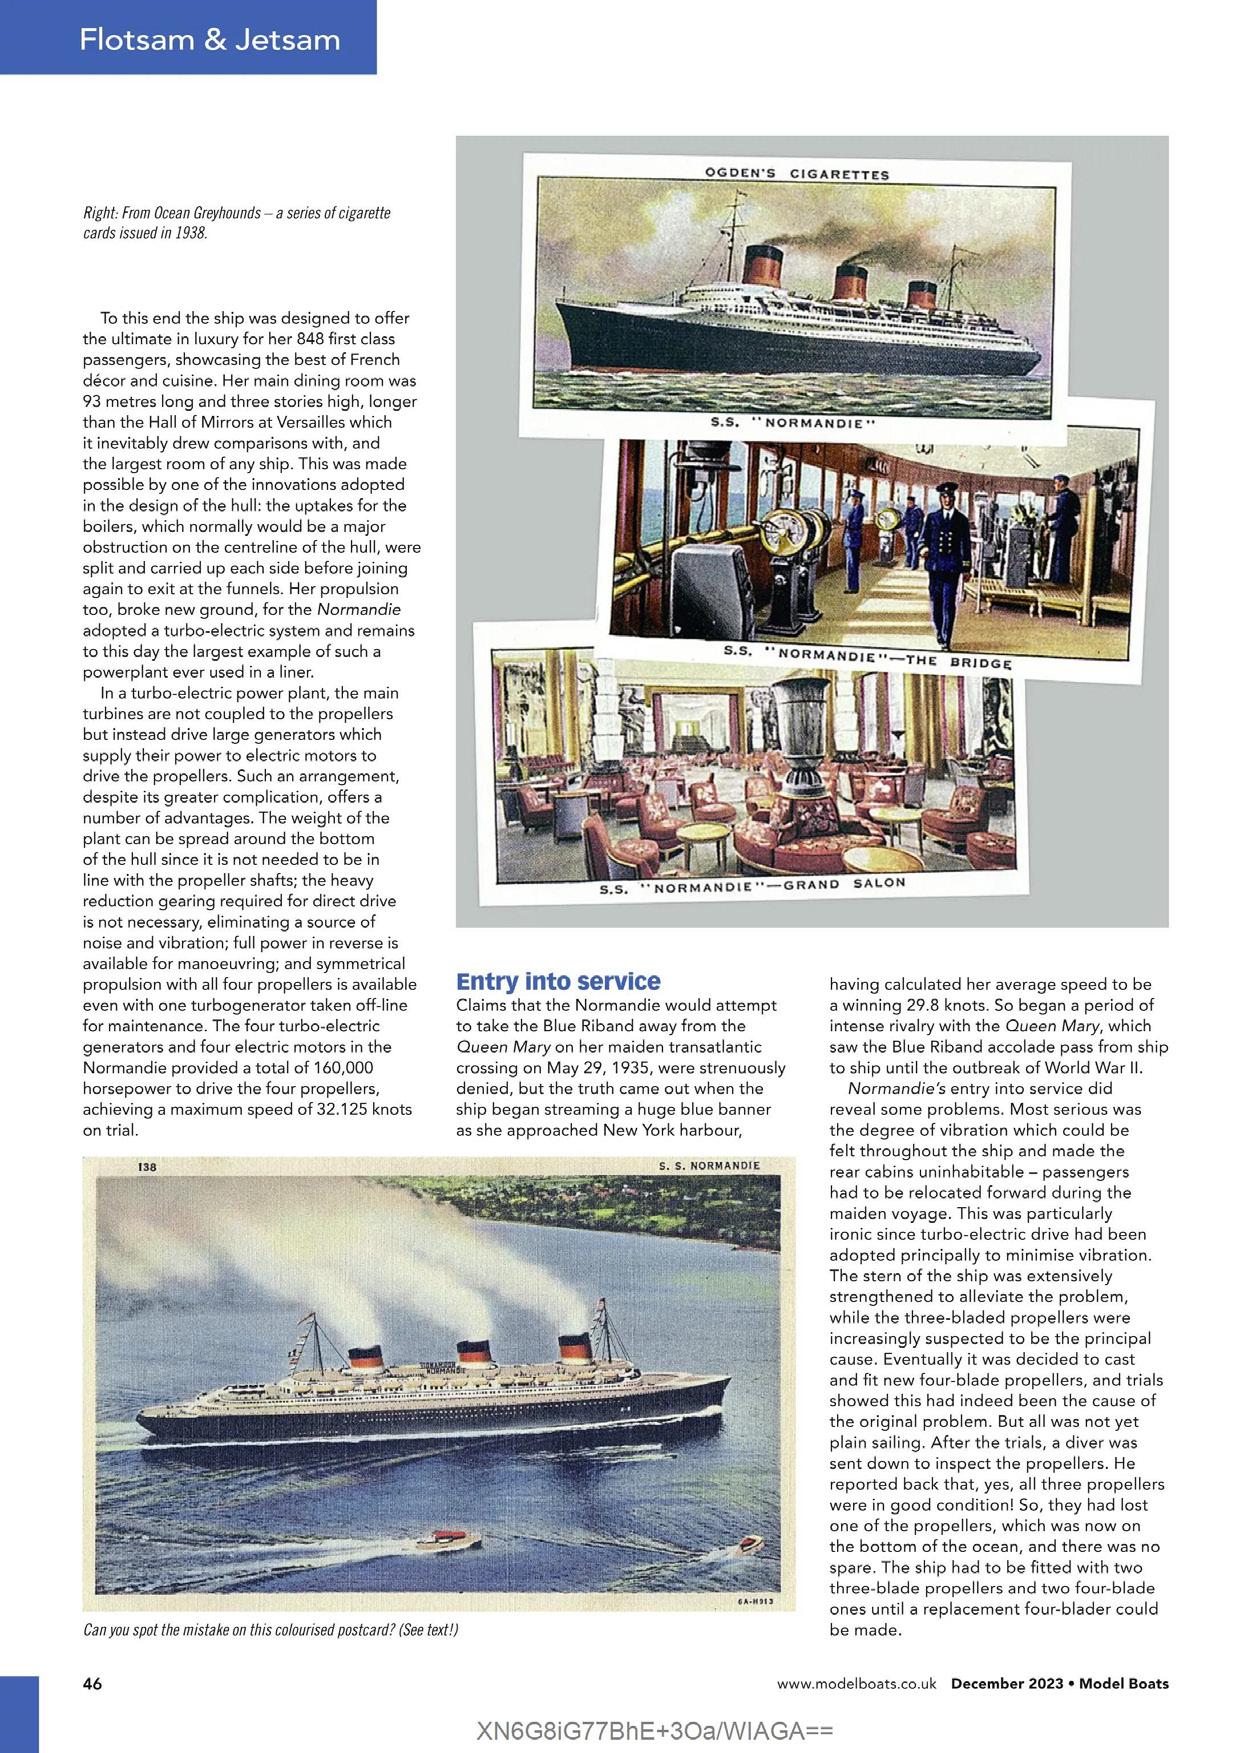 Normandie by model boats page 3